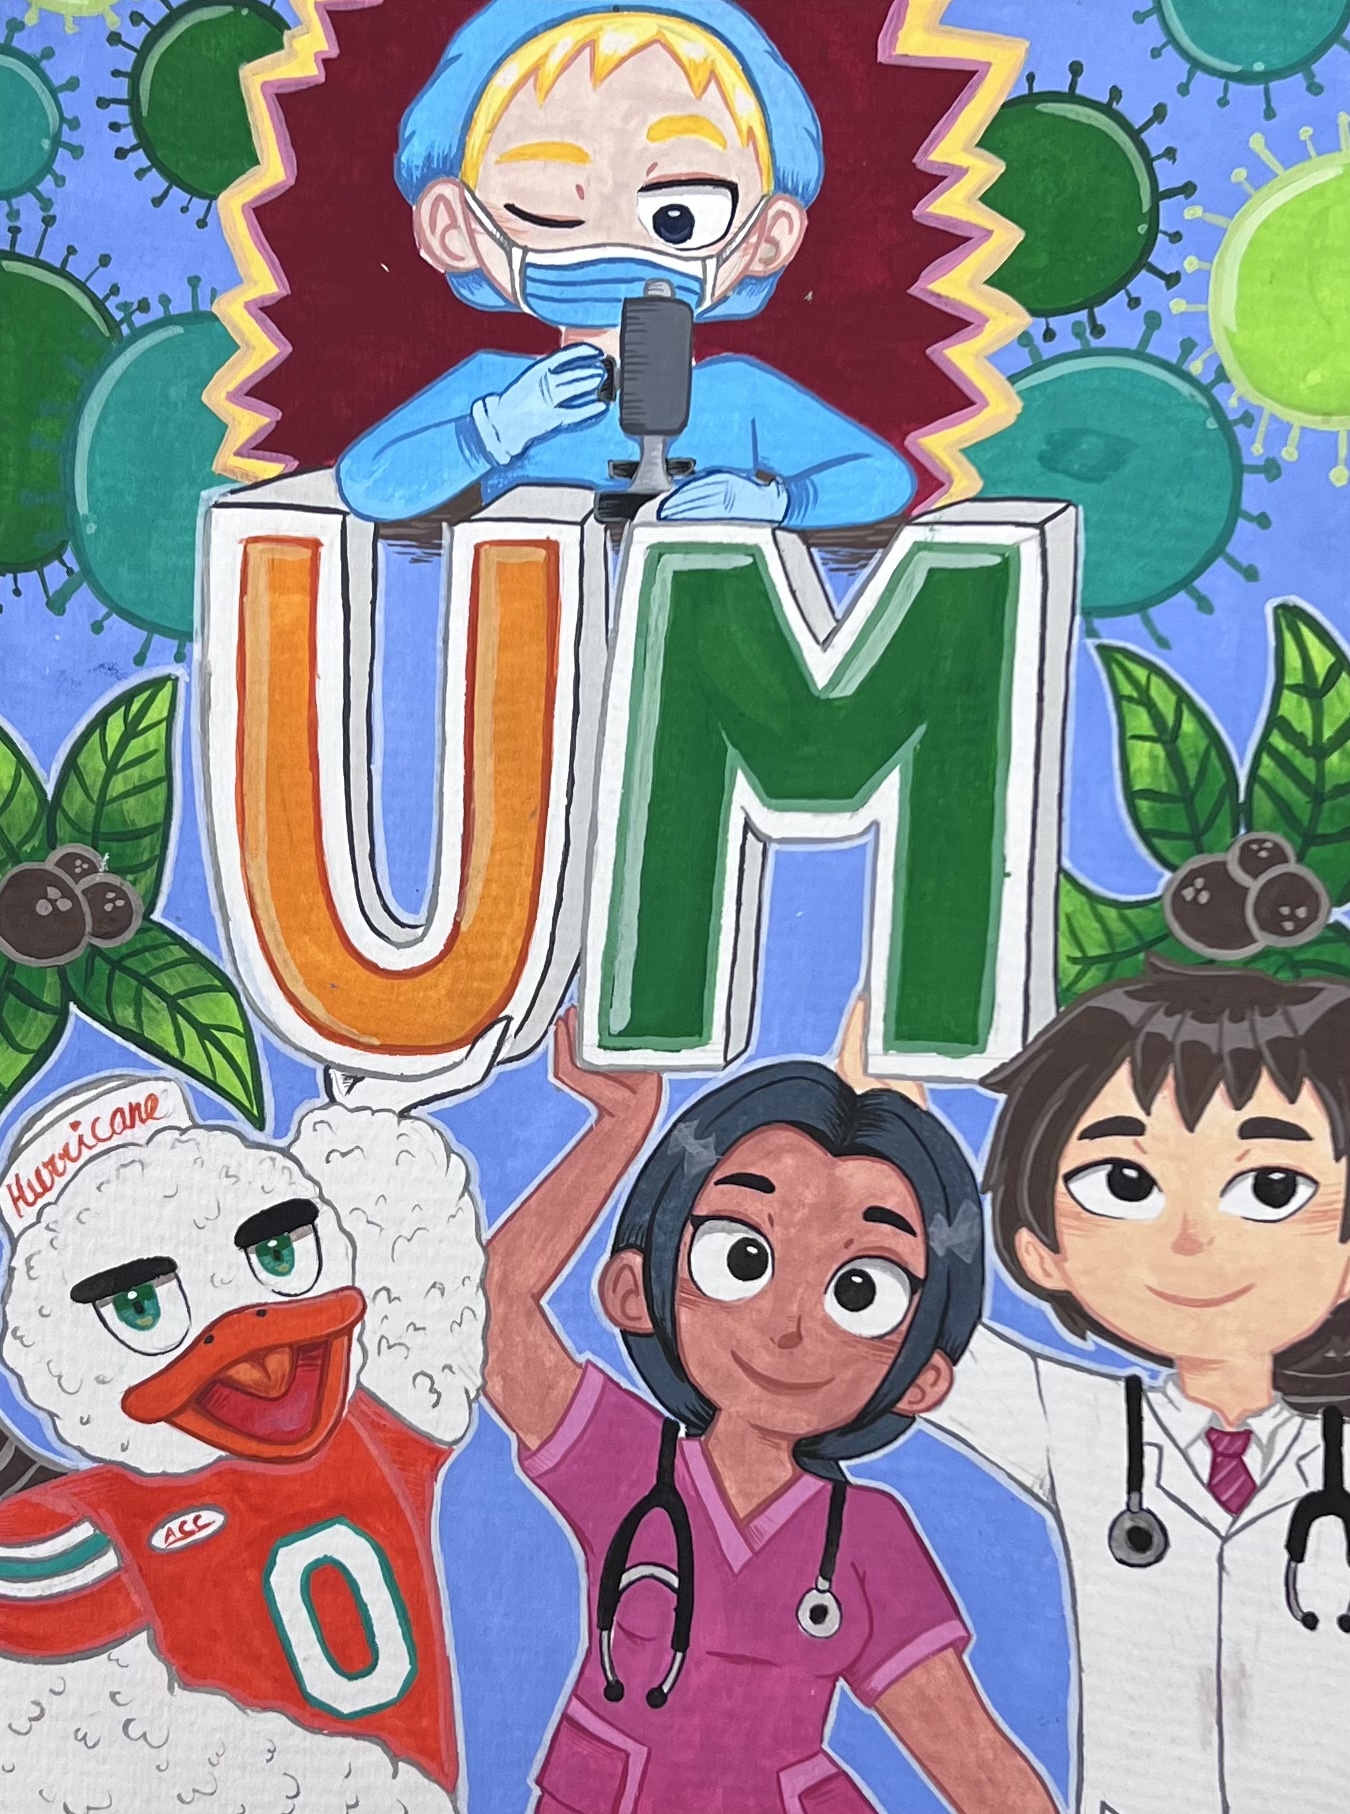 A hand drawn image featuring the UM logo and 3 health care workers. 